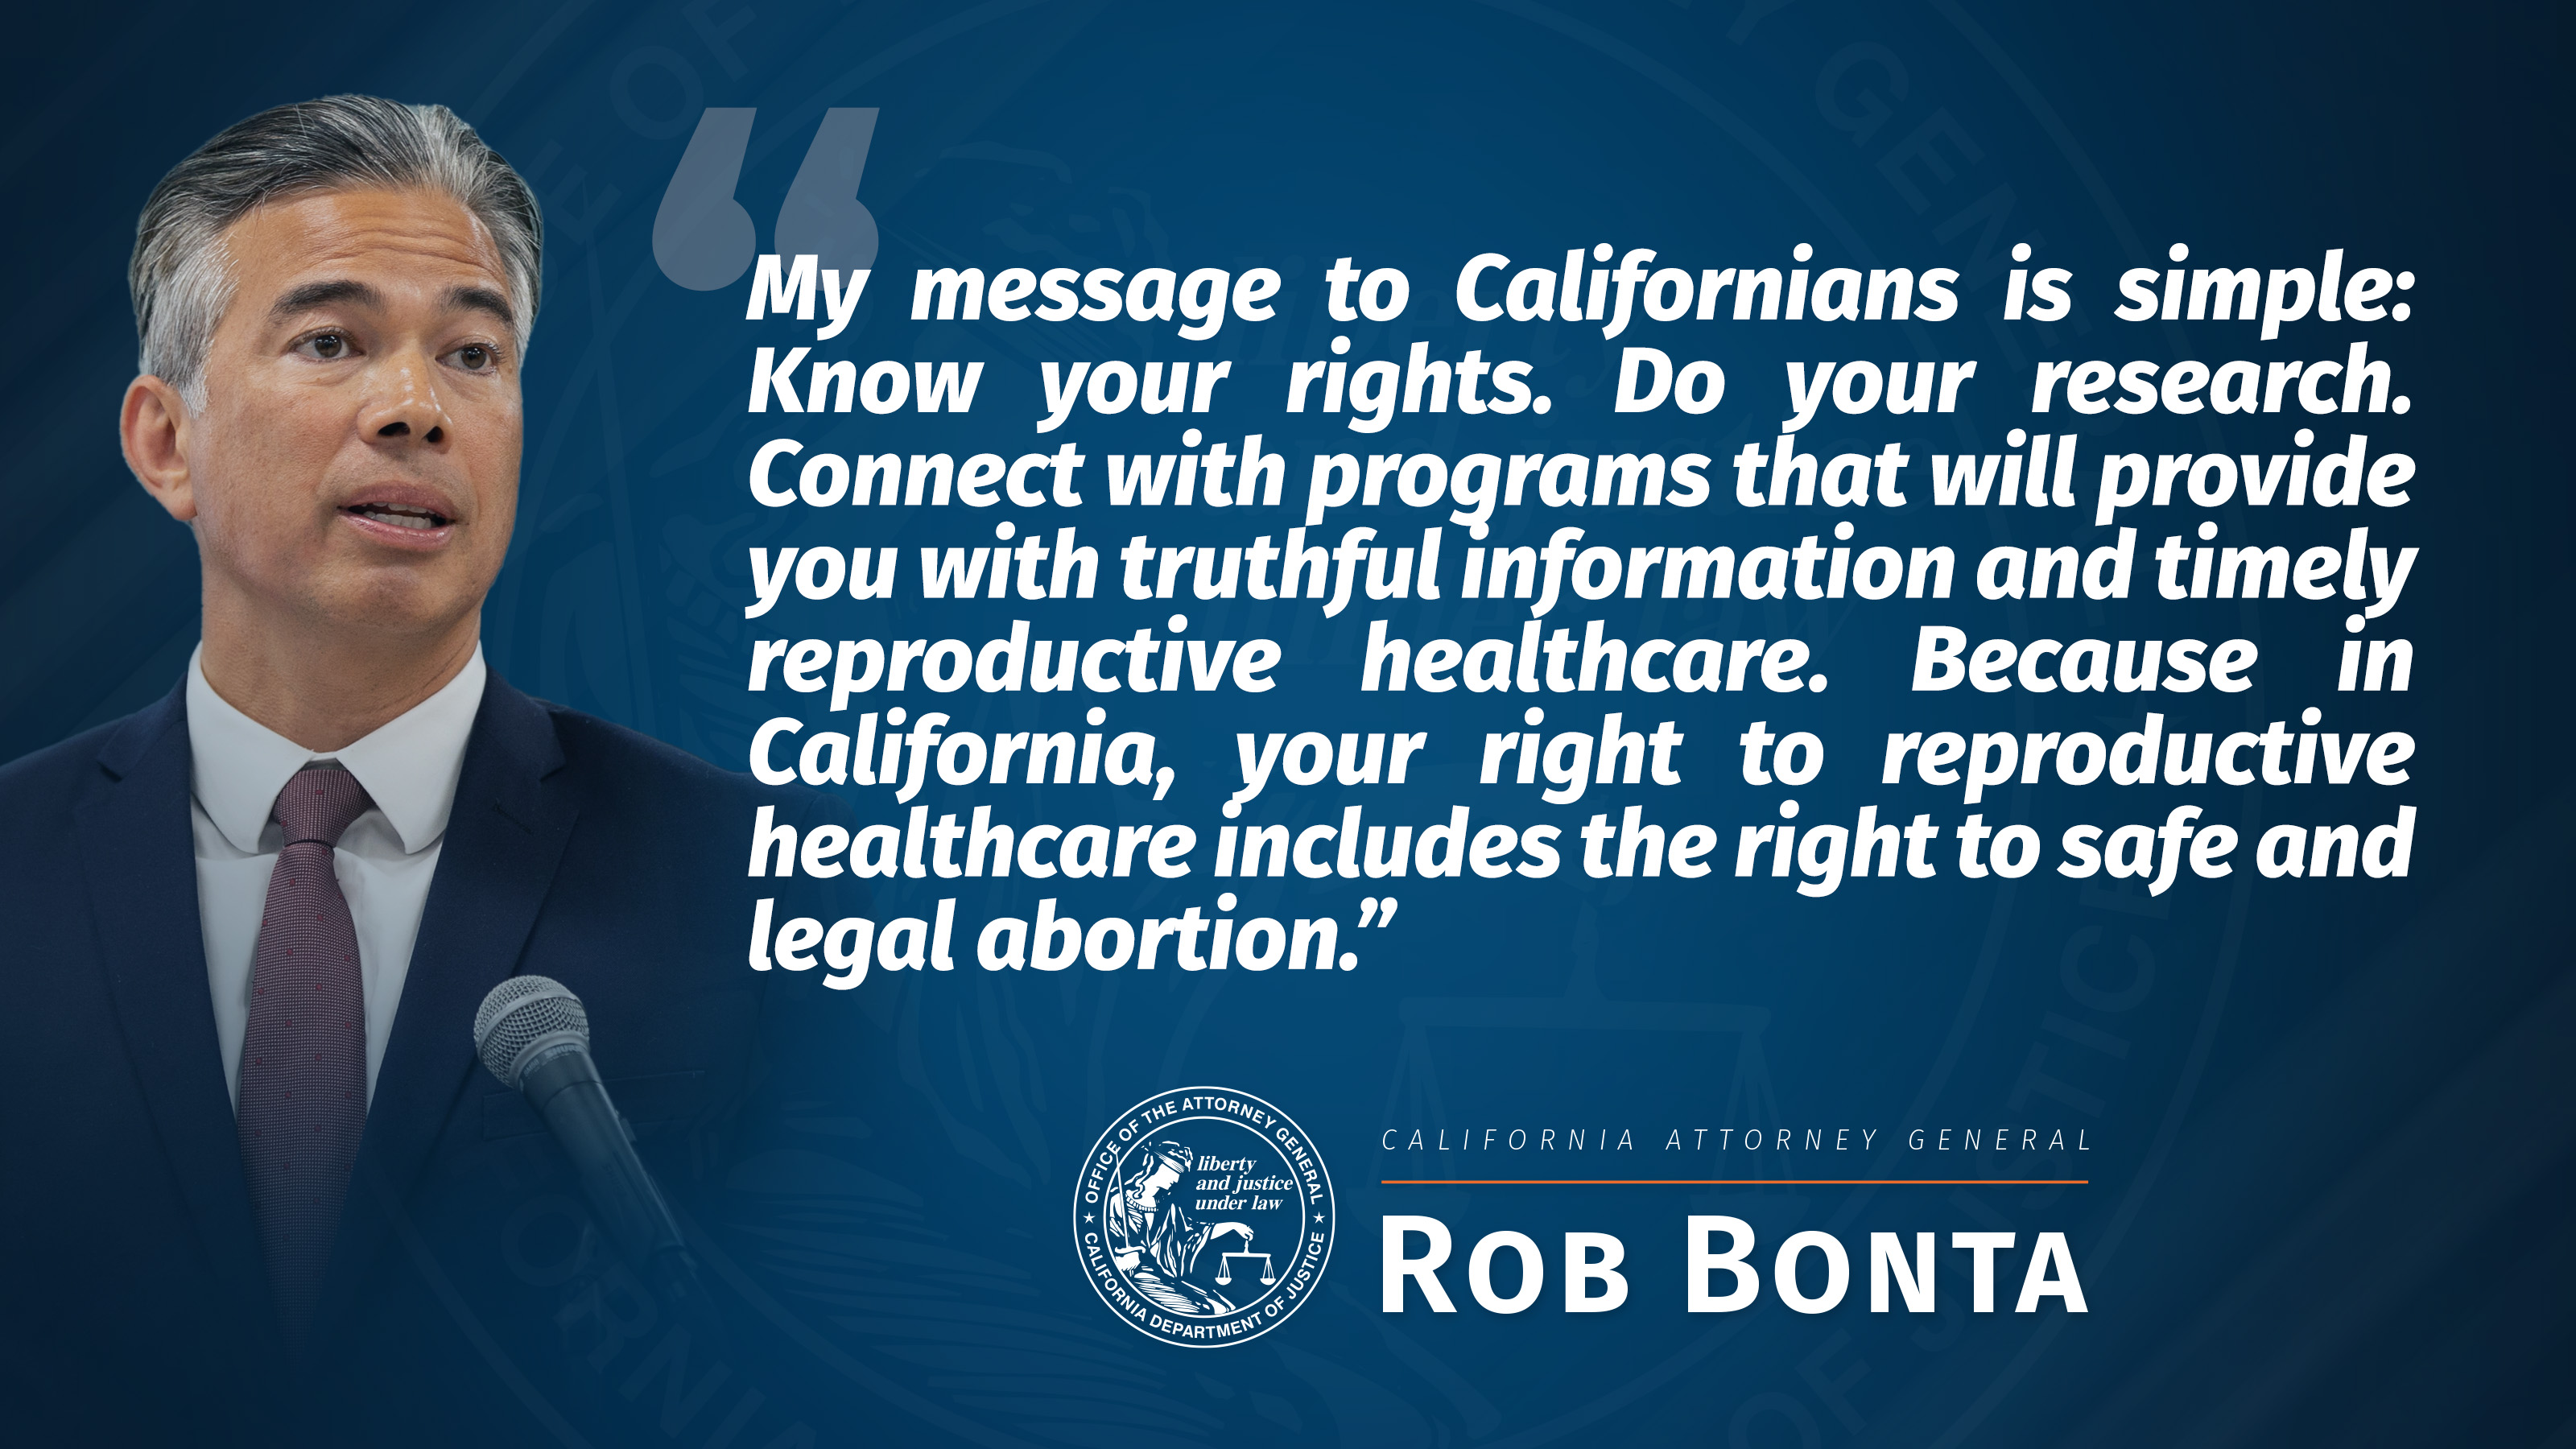 My message to Californians is simple: Know your rights. Do your research. Connect with programs that will provide you with truthful information and timely reproductive healthcare. Because in California, your right to reproductive healthcare includes the right to safe and legal abortion. -Rob Bonta